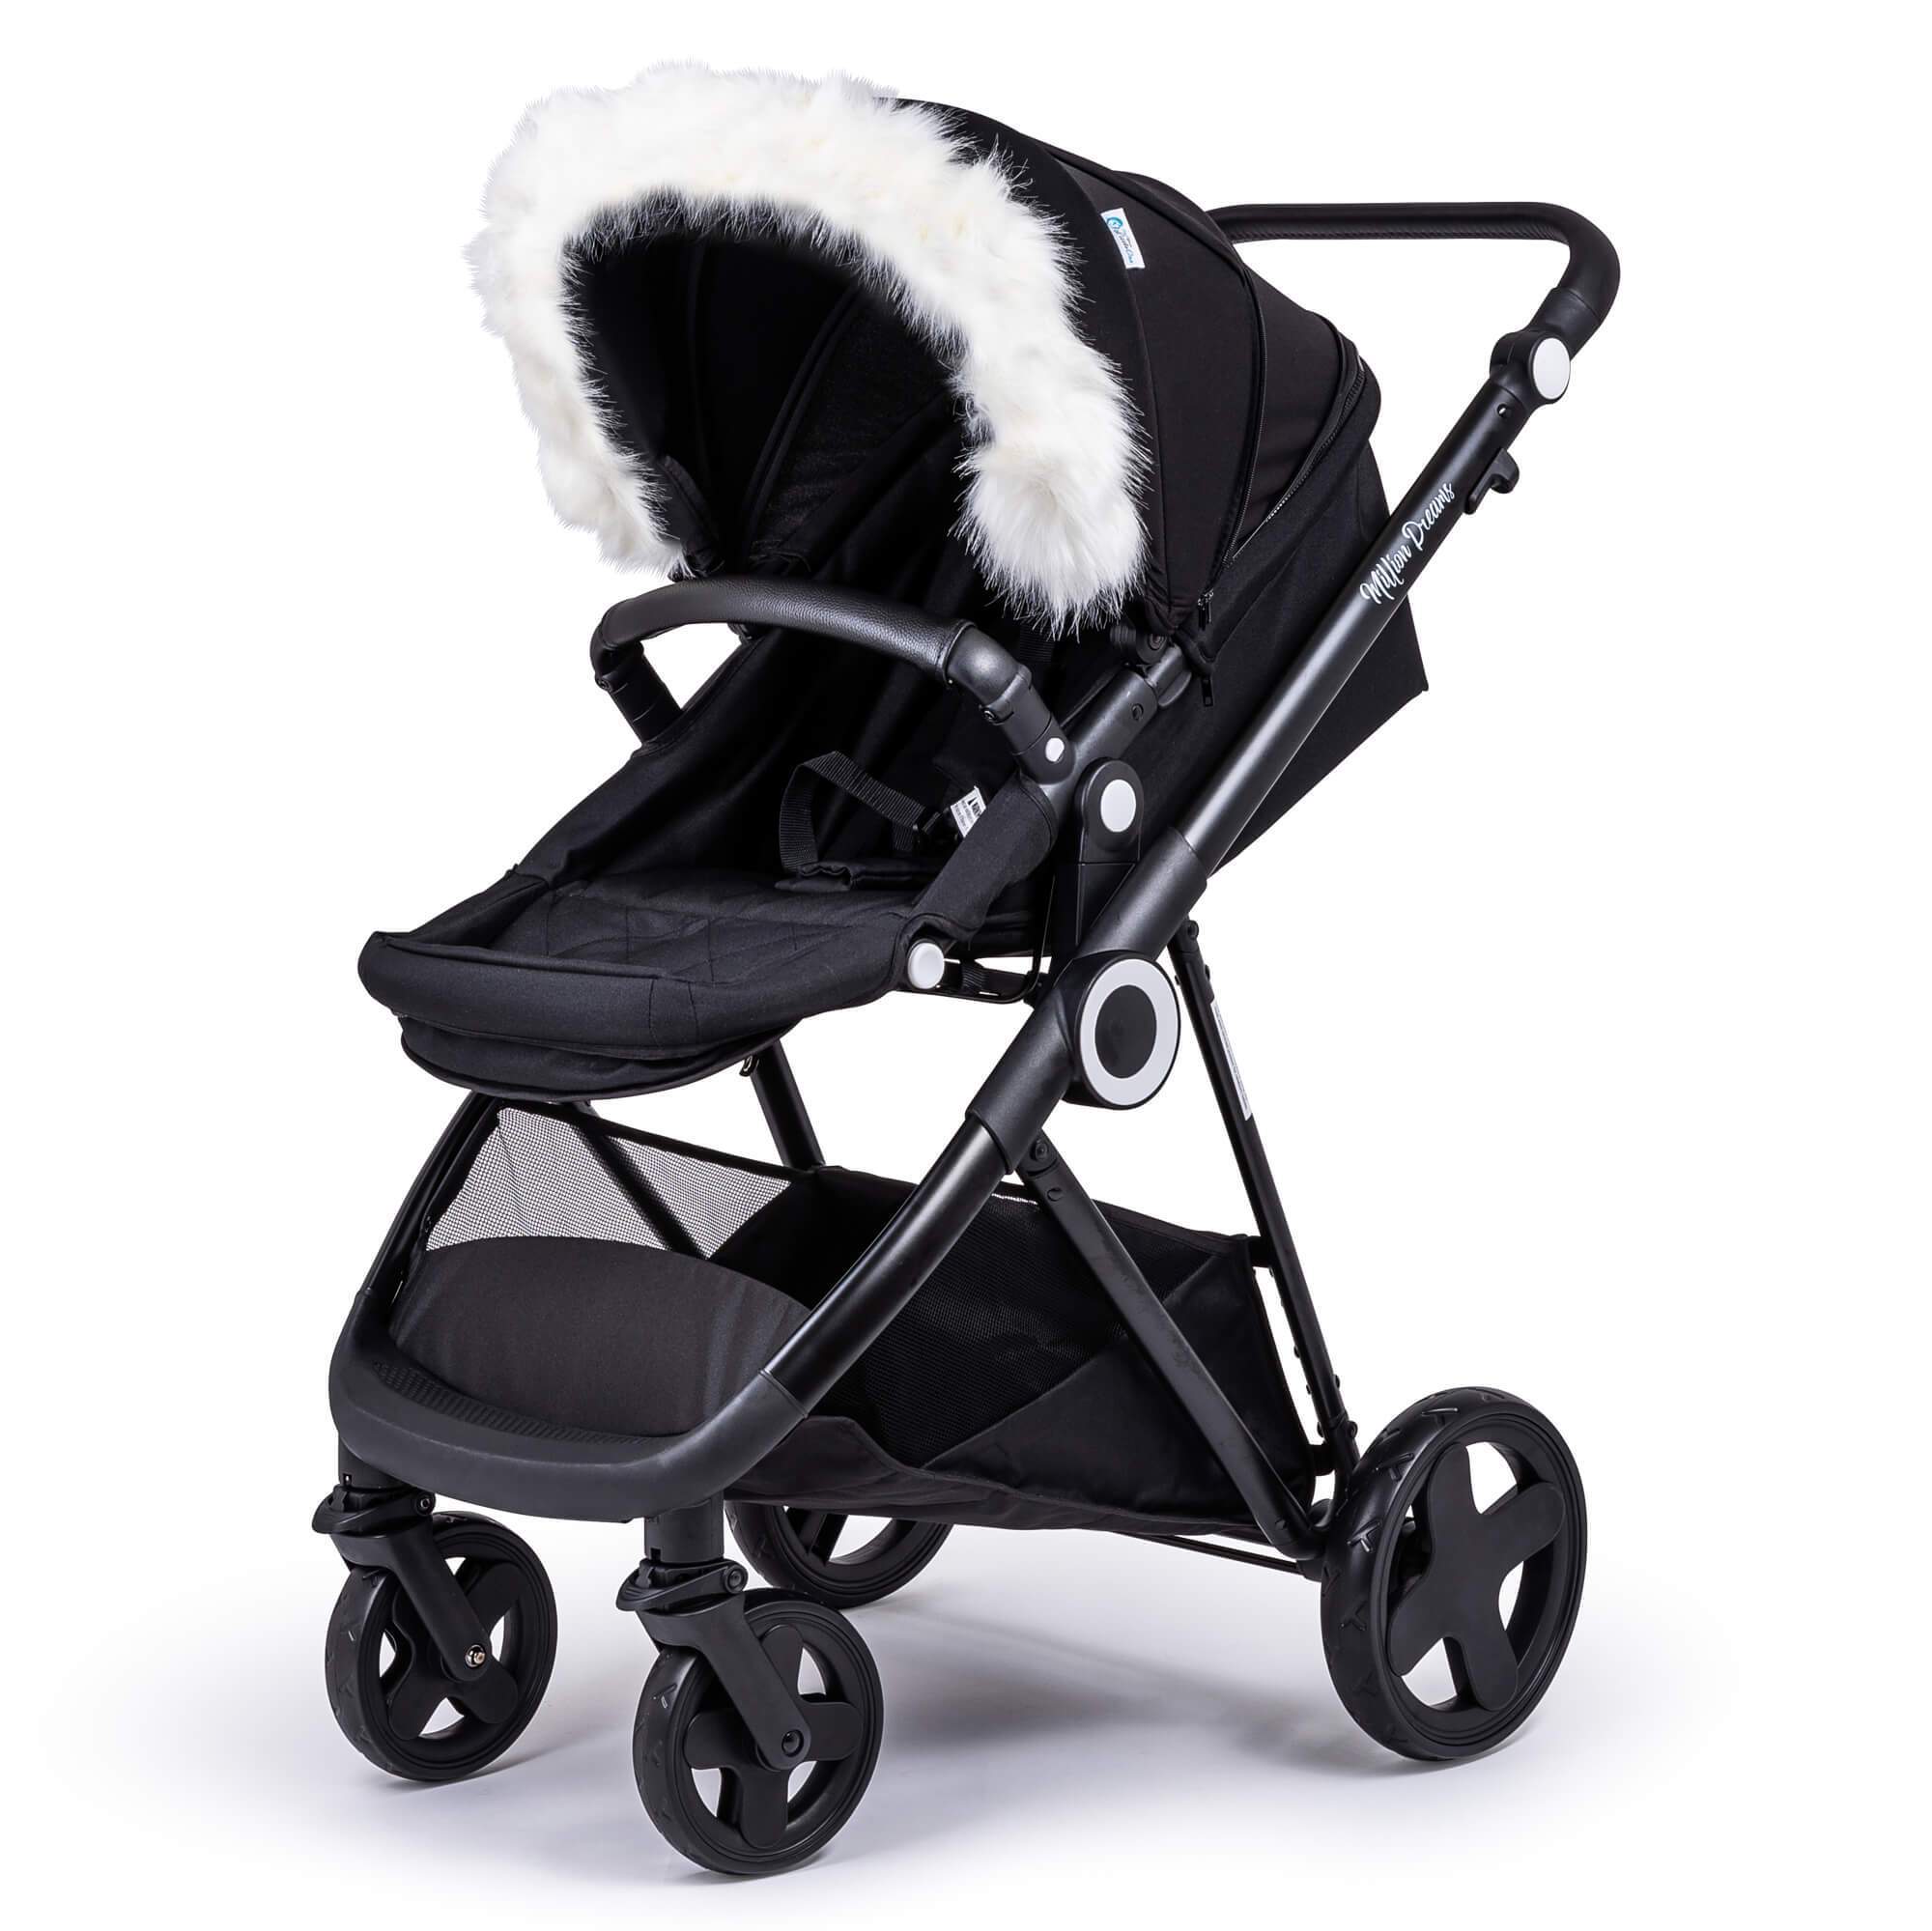 Pram Fur Hood Trim Attachment for Pushchair Compatible with Gesslein - White / Fits All Models | For Your Little One